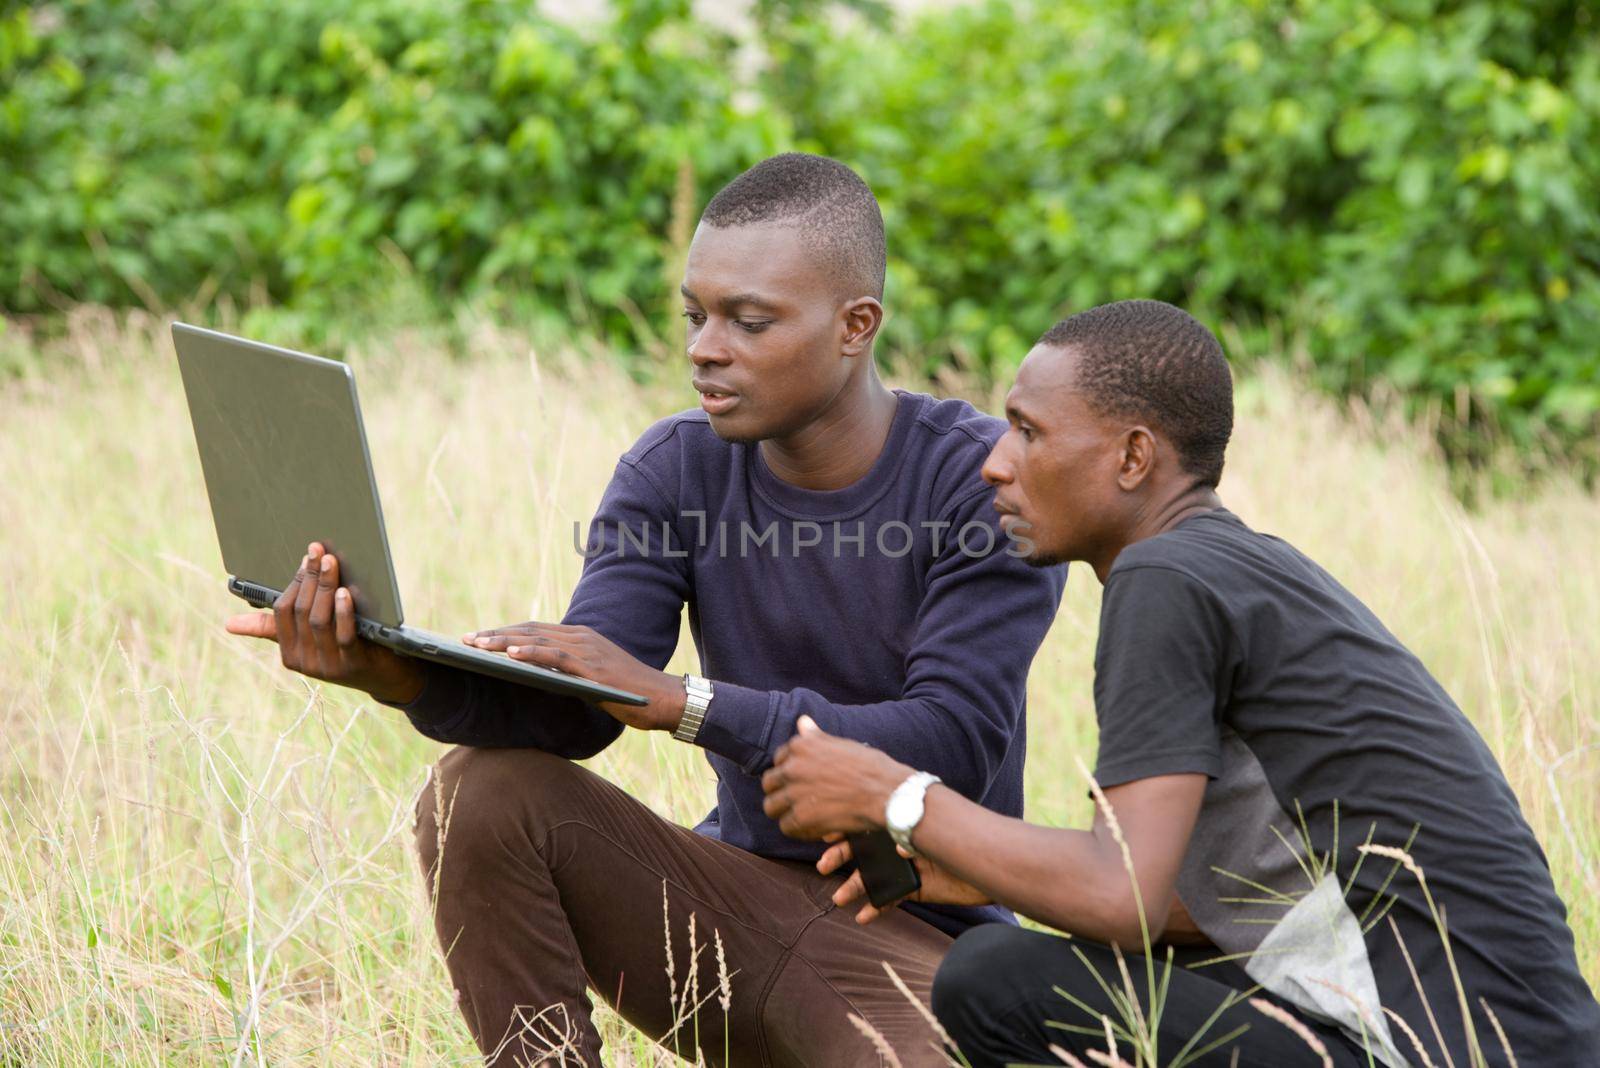 young people crouching in herbs one with laptop and both look at the screen.